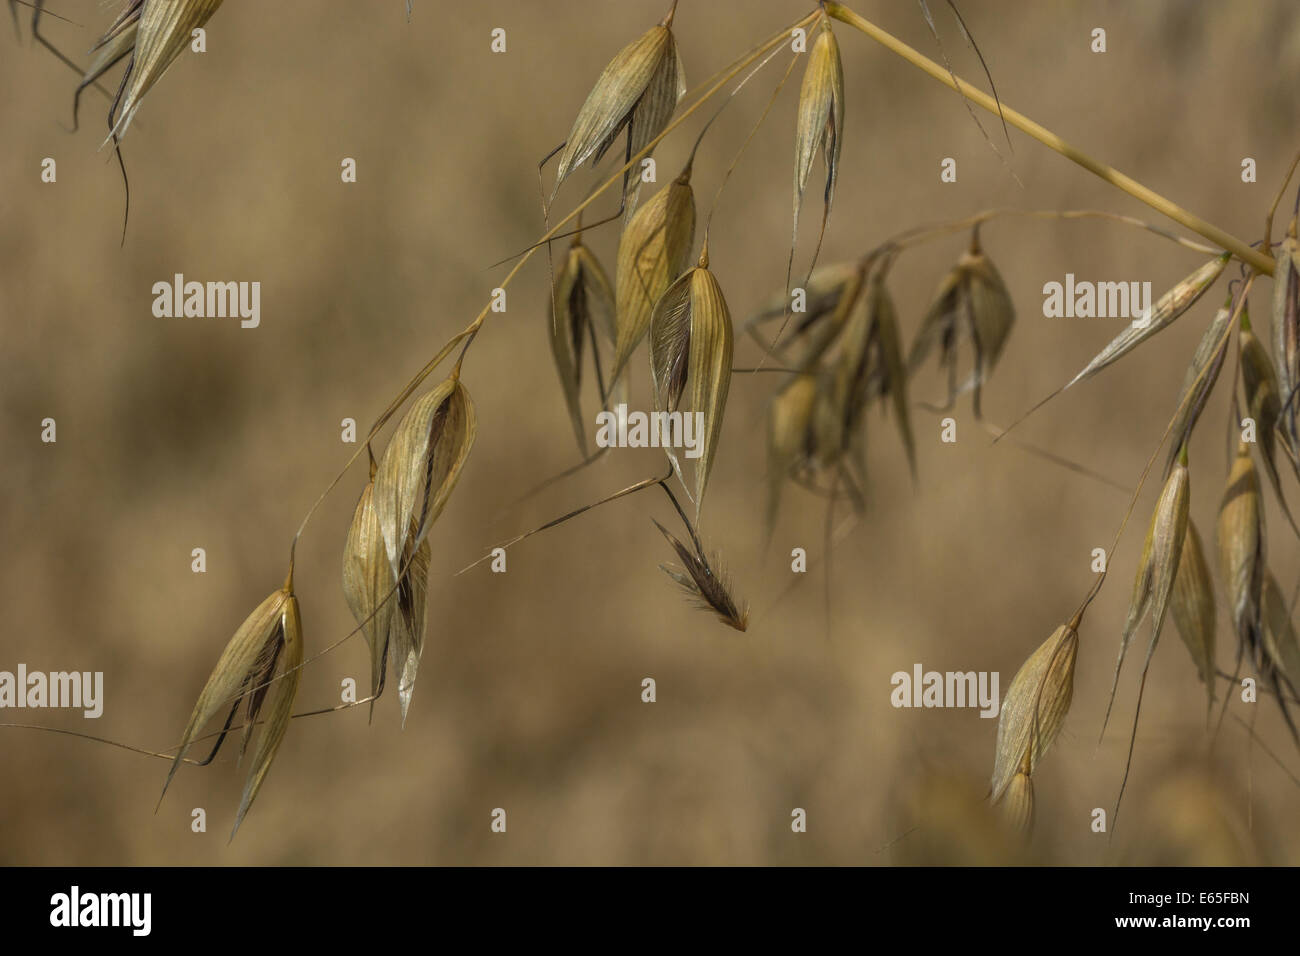 Close-up of common oat / Avena sativa. Visual metaphor for concept of famine. Metaphor for food security / growing food. Stock Photo